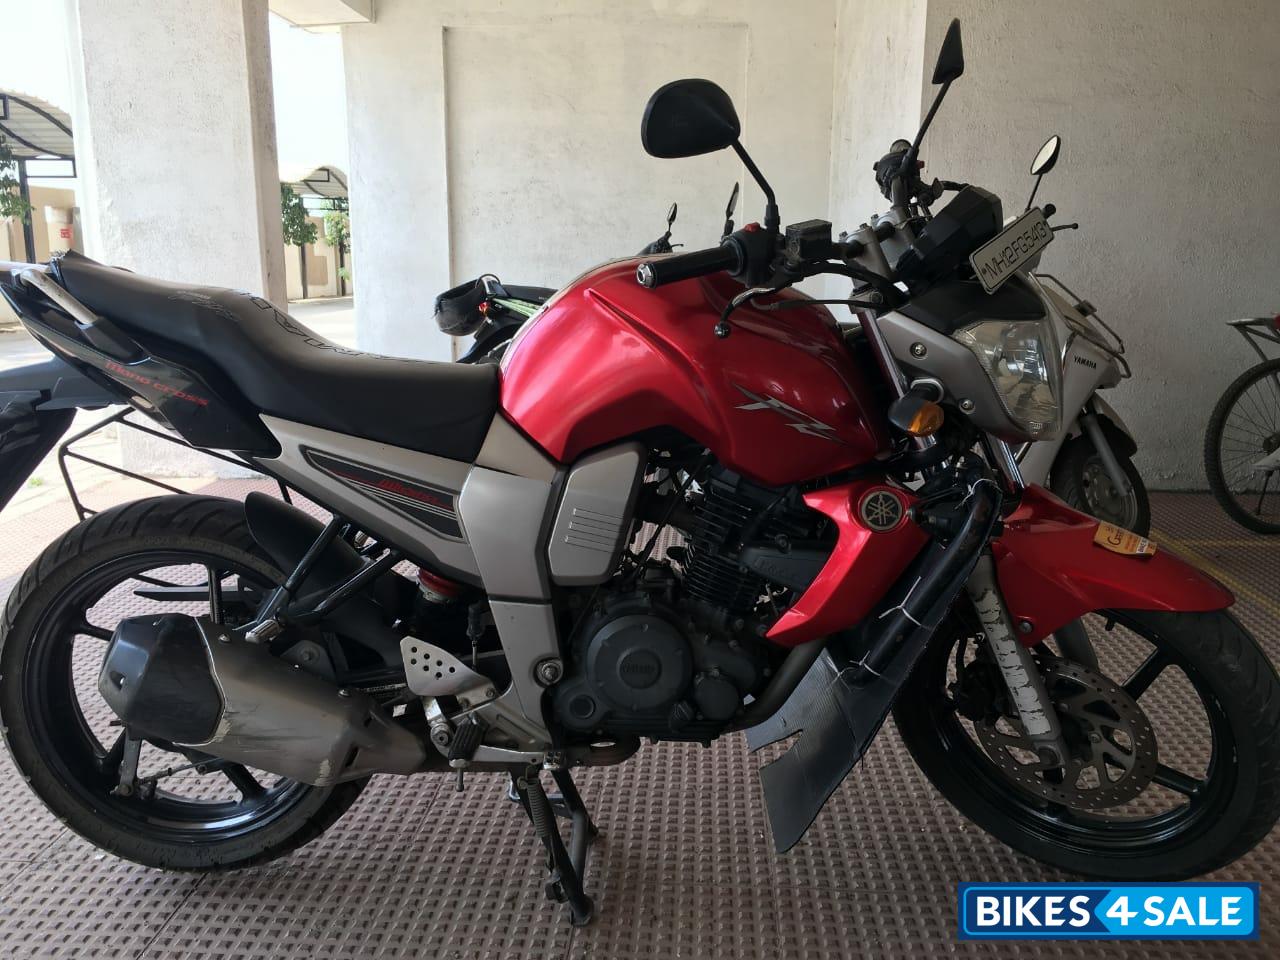 Used 2009 model Yamaha FZ16 for sale in Pune. ID 250979. Red colour ...